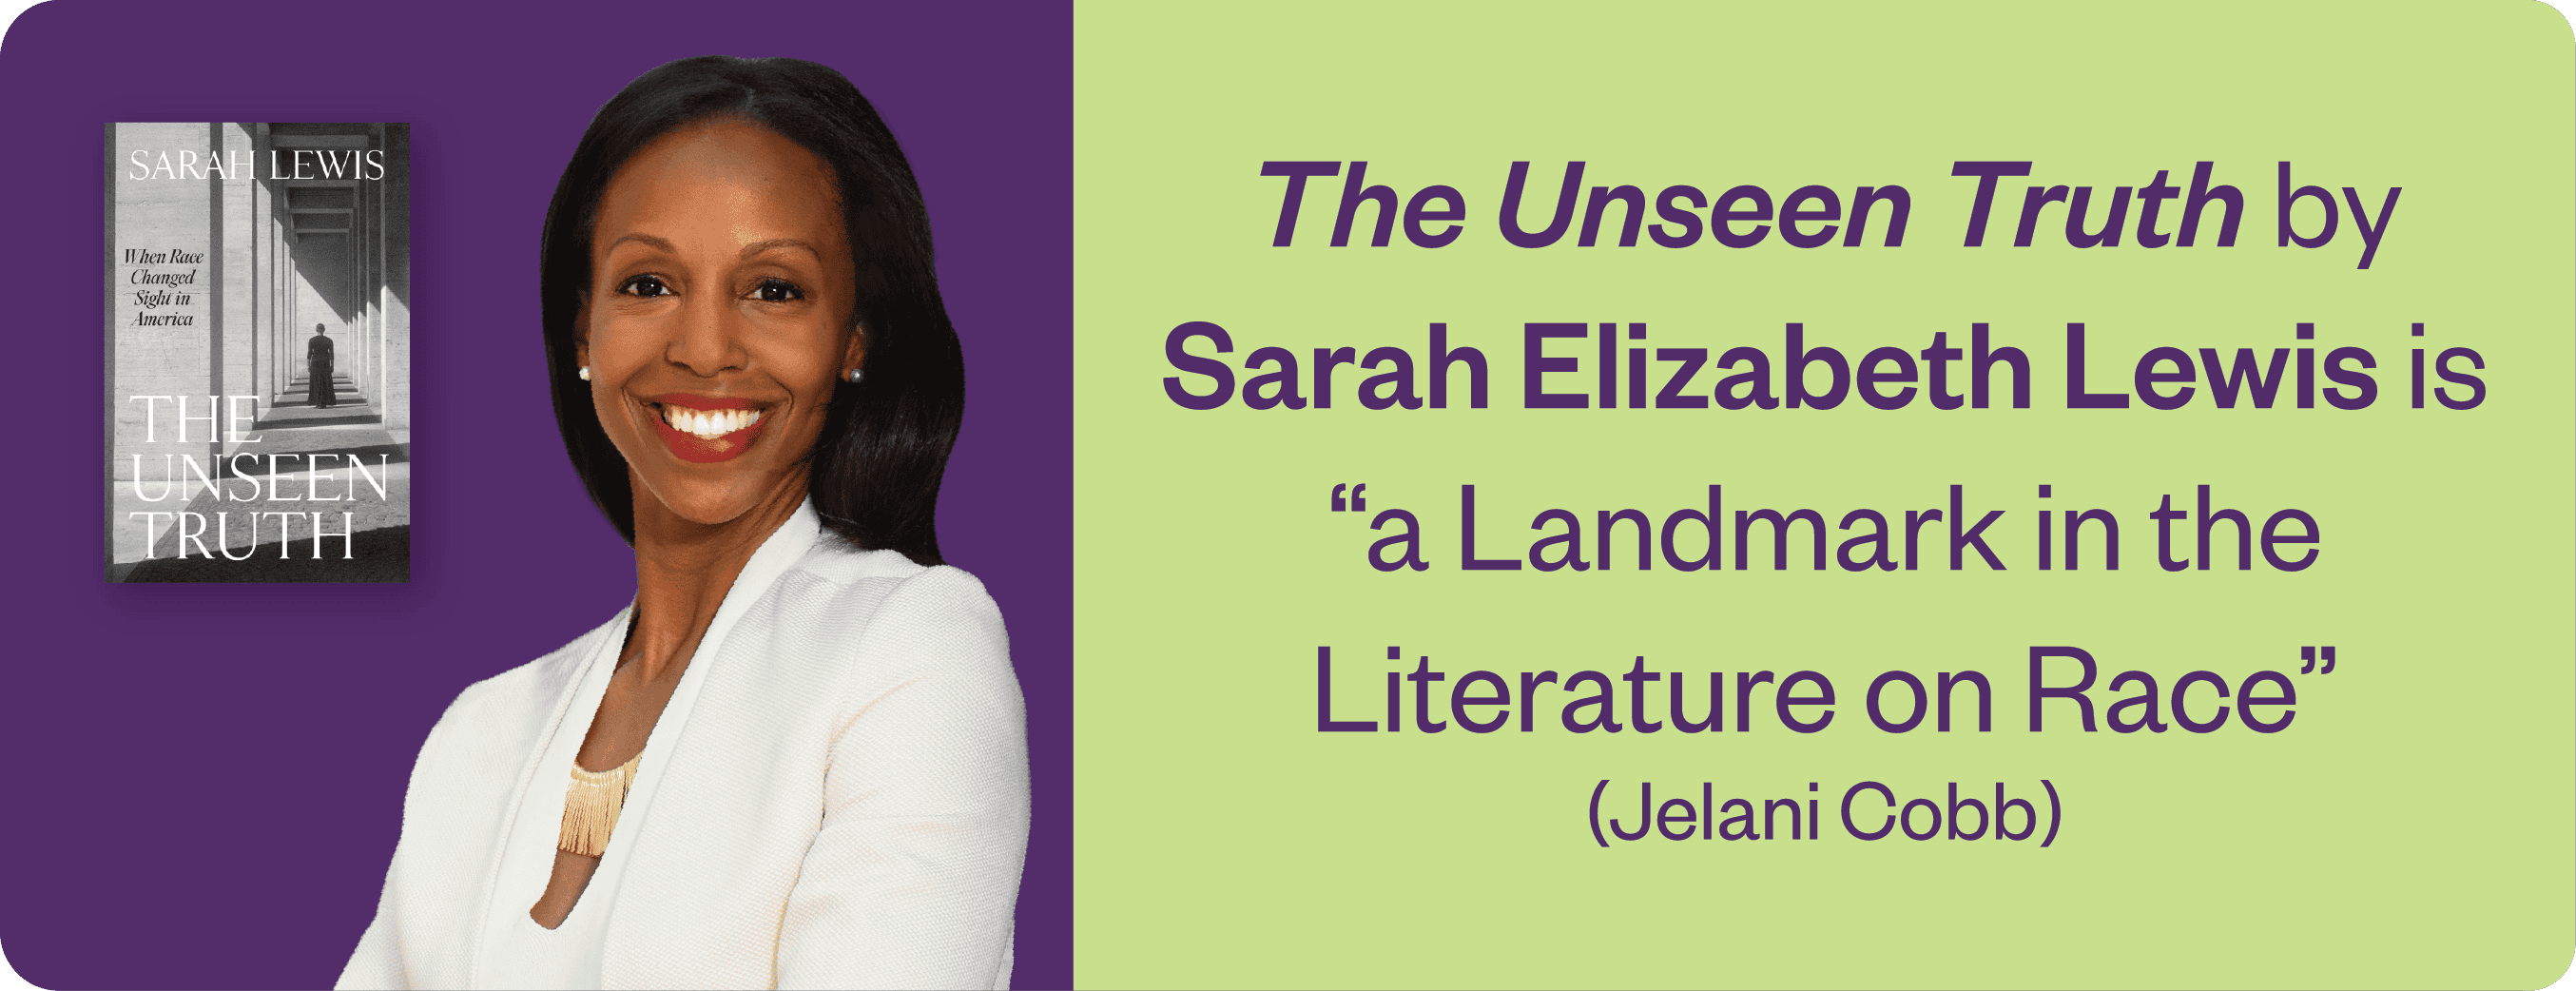 “A Landmark in the Literature on Race”: Sarah Elizabeth Lewis’s New Book on How Images Can Help Us Combat Injustice